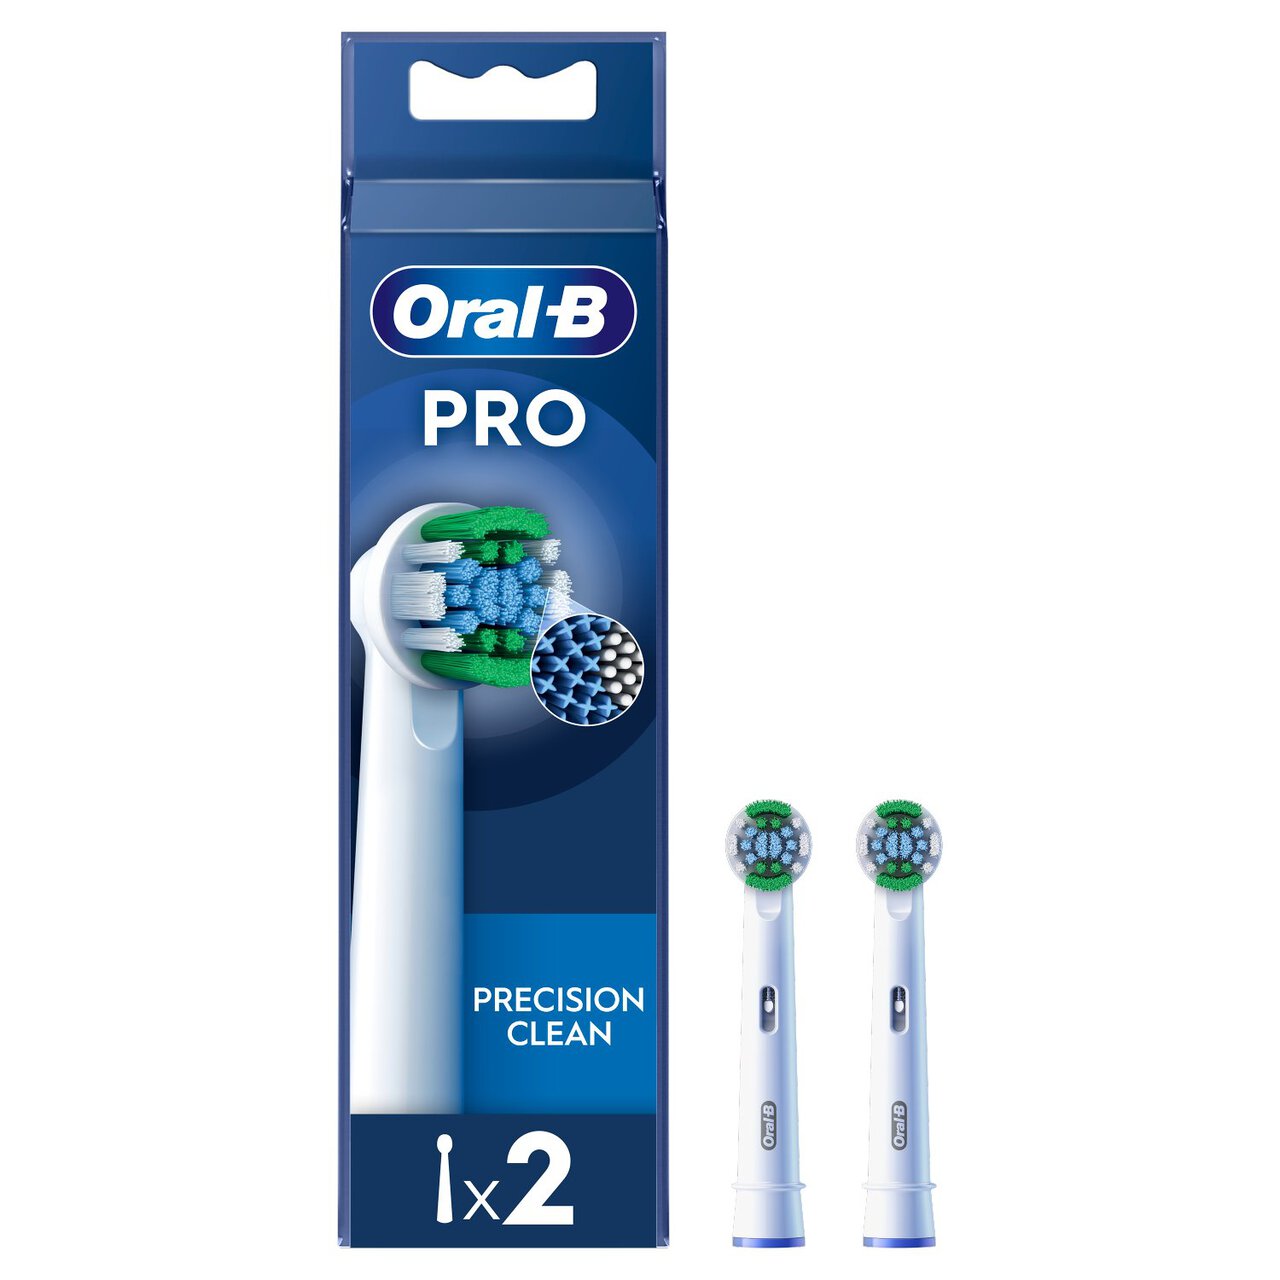 Oral-B Precision Clean Toothbrush Heads 2 per pack